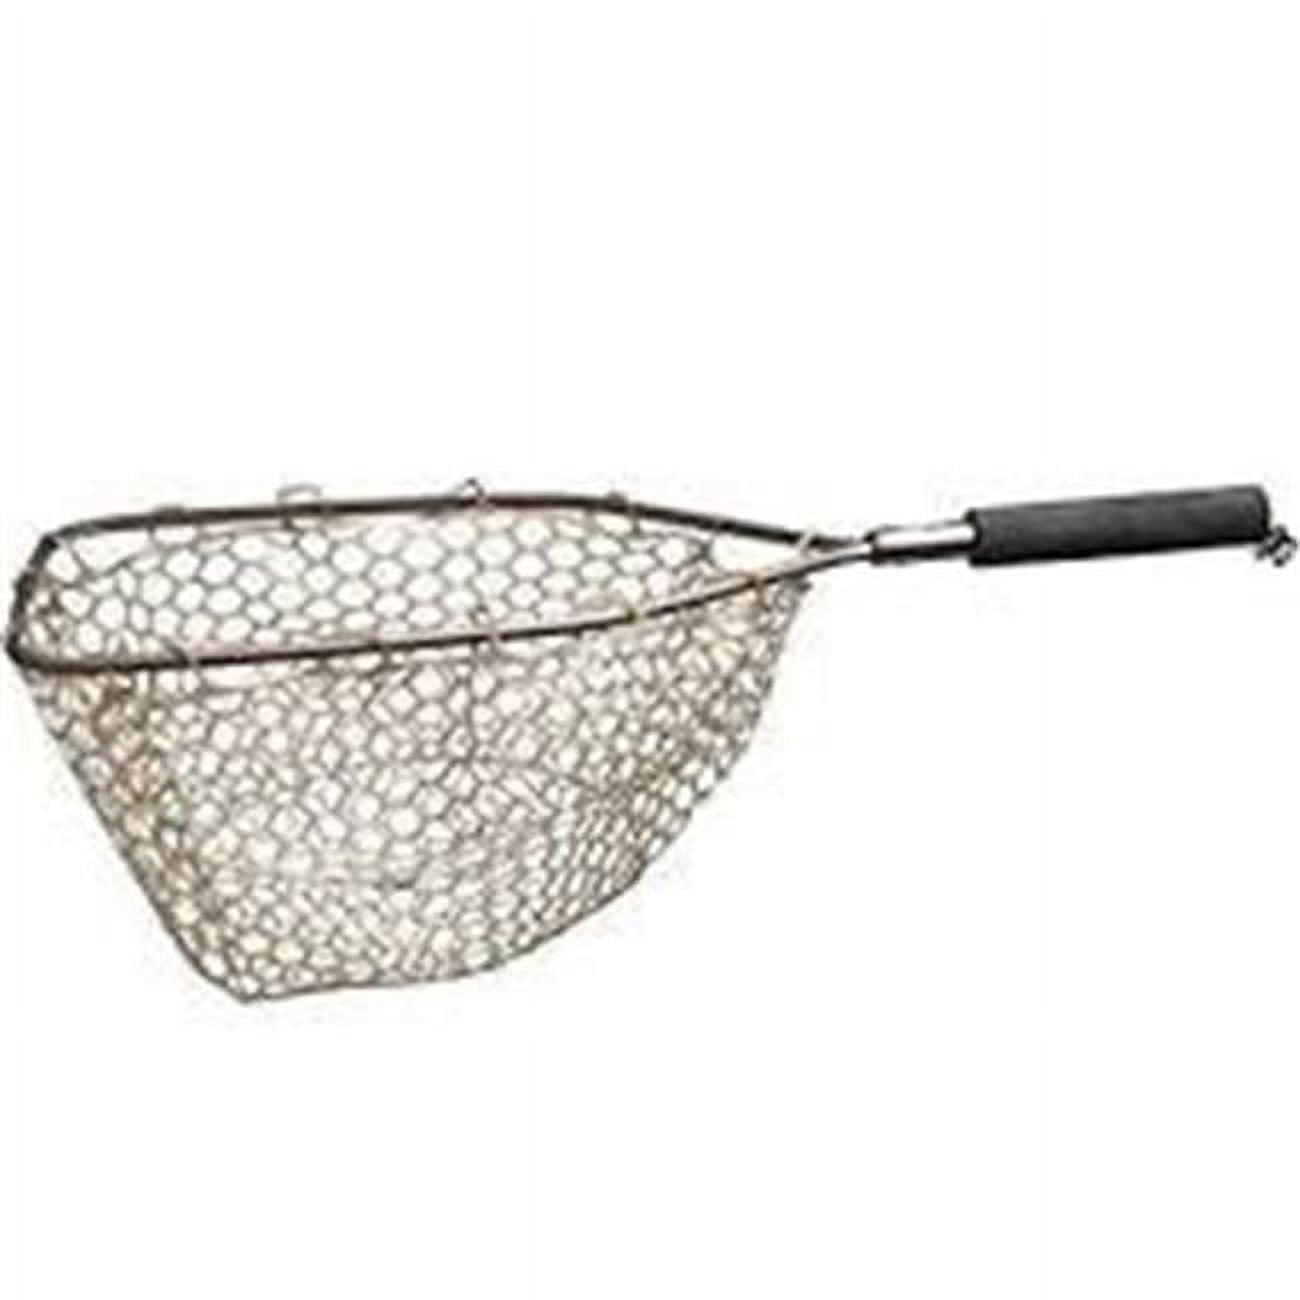 Picture of Adamsbuilt Fishing ABGCRN15-A 15 in. Aluminum Catch & Release Net with Camo Ghost Netting